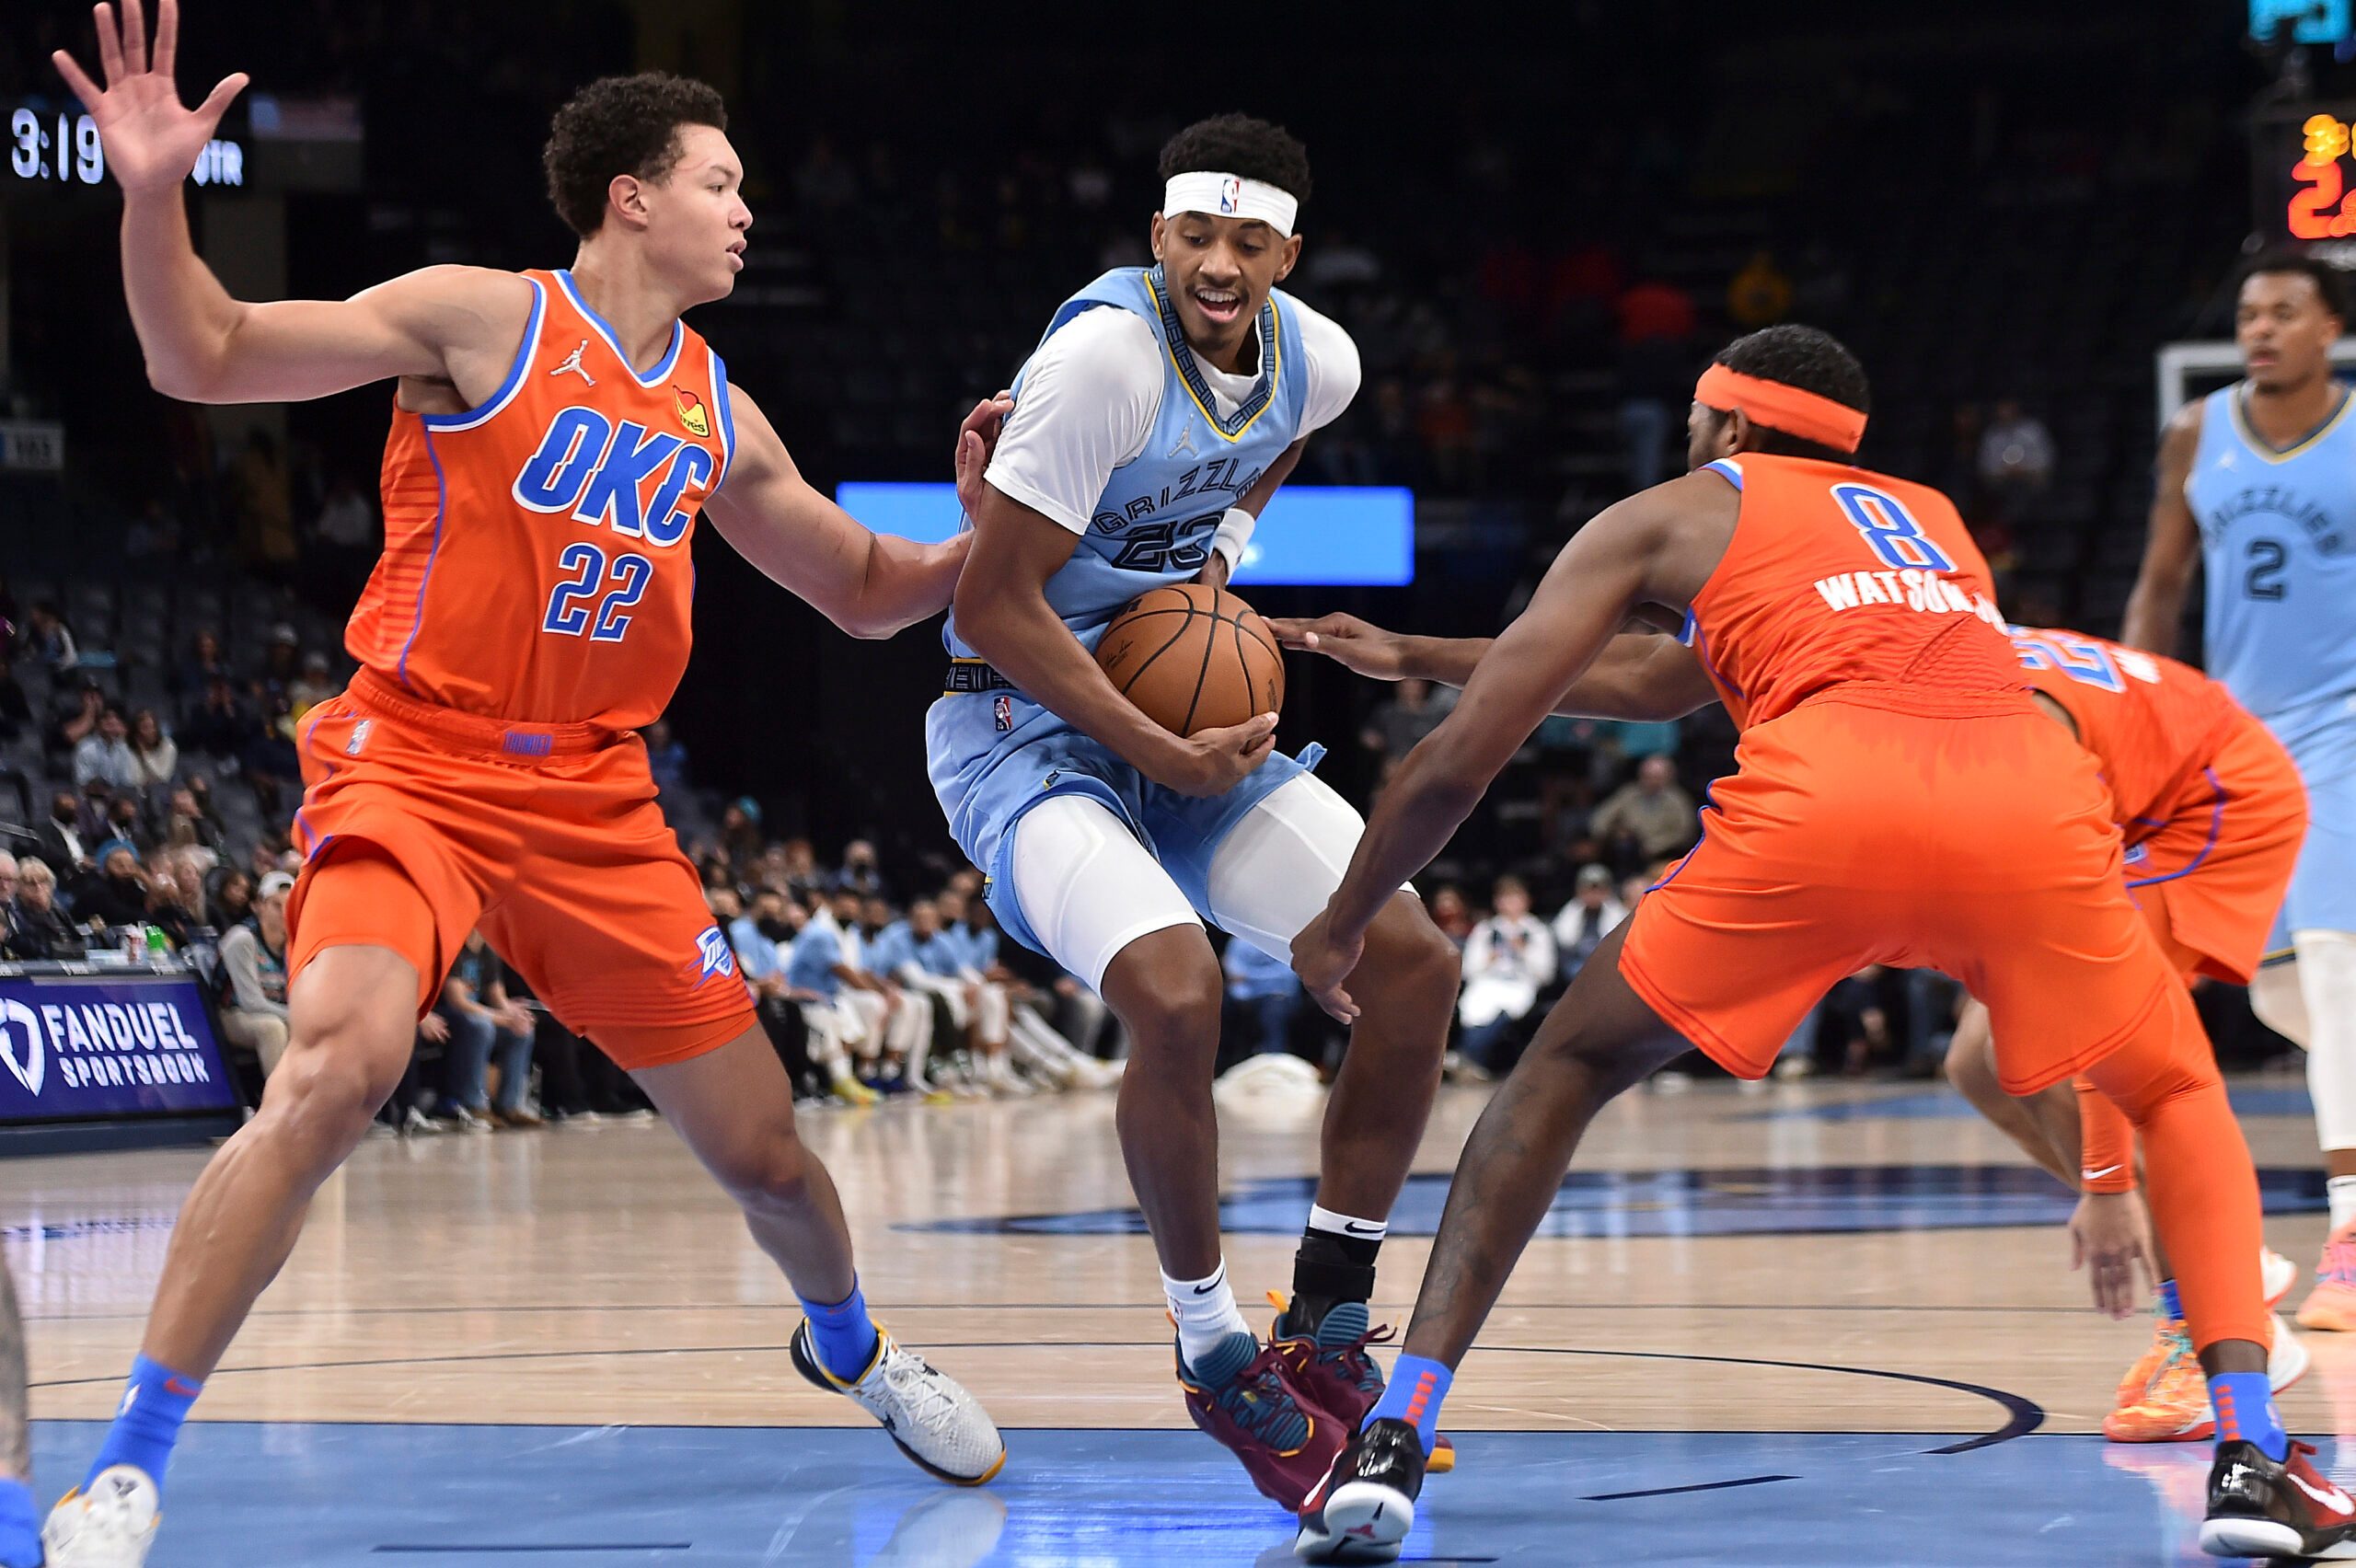 Thunder tune up for play-in round with victory over Grizzlies